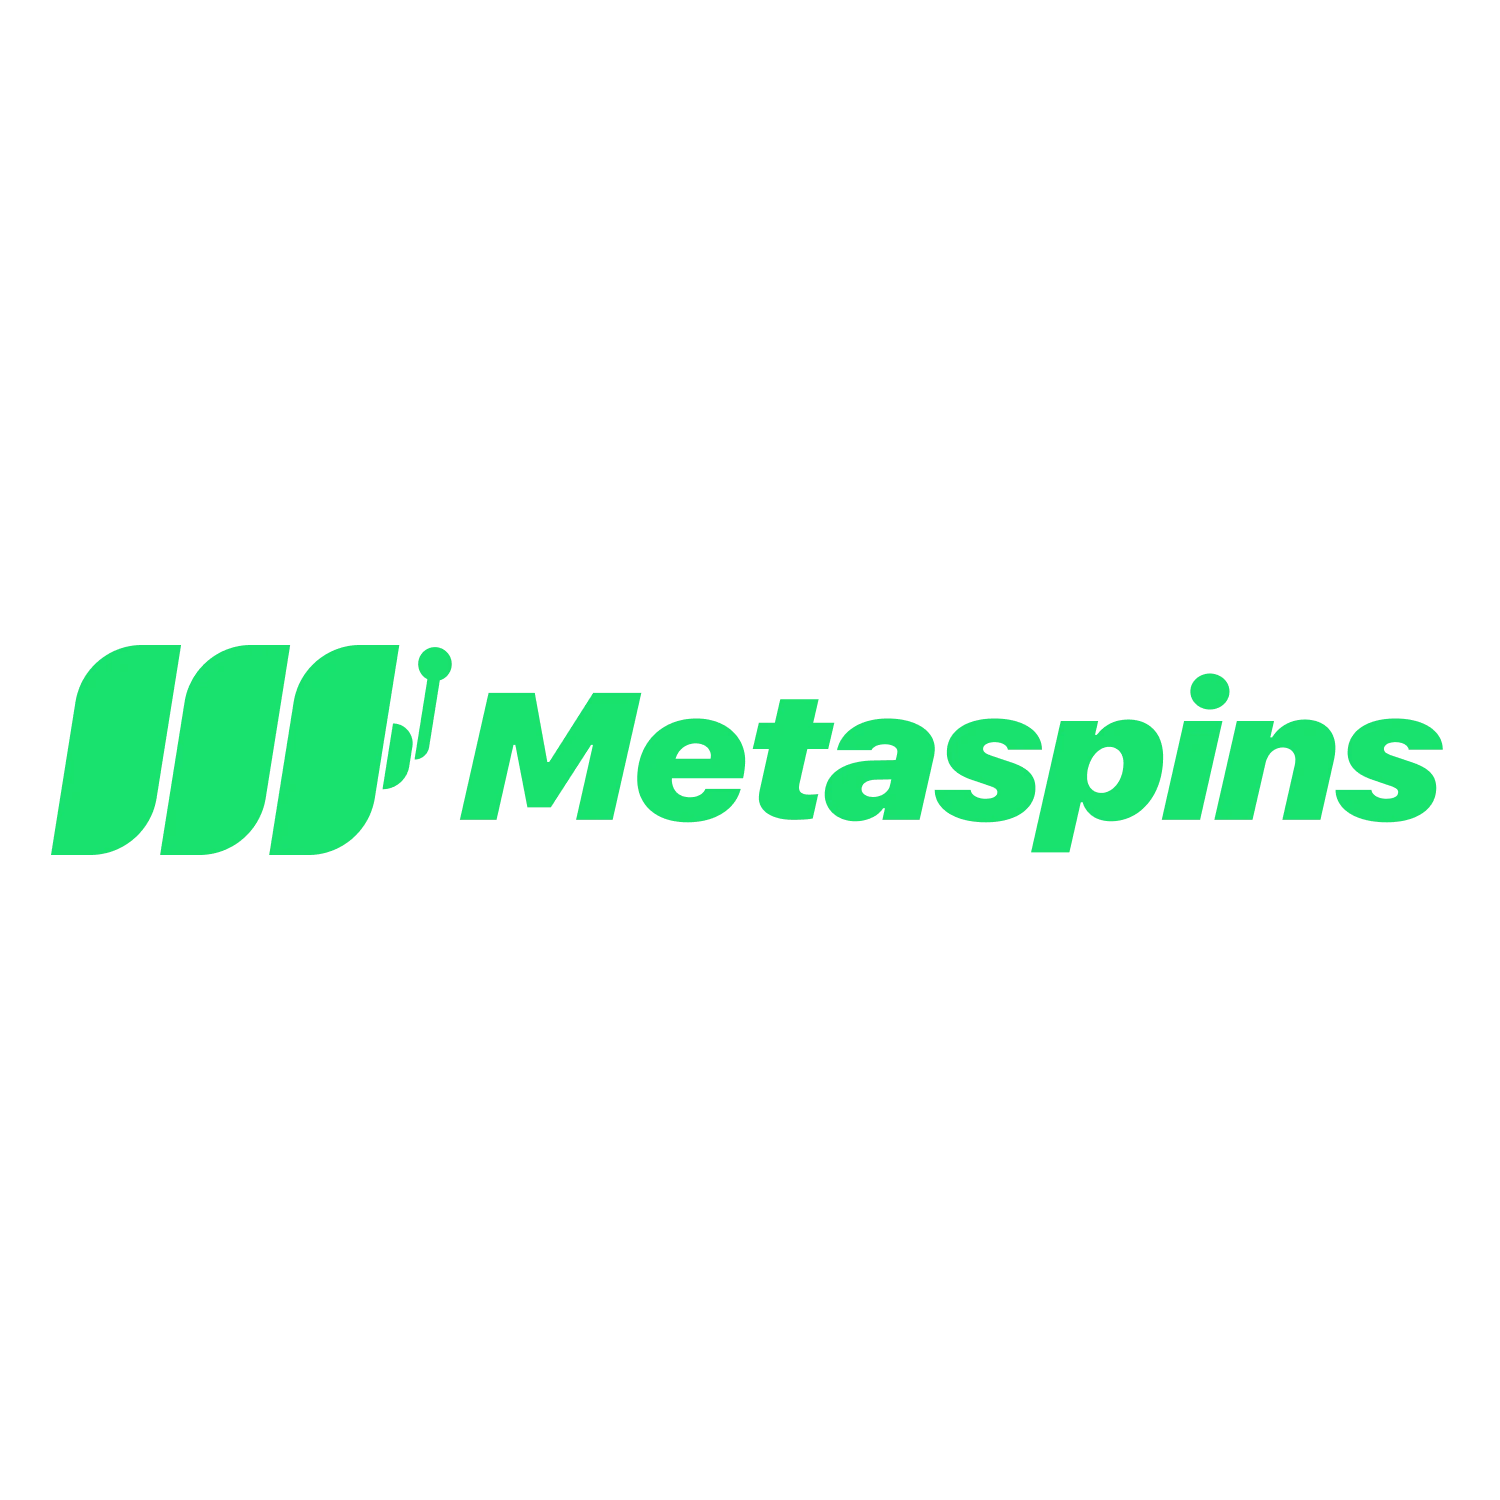 Crypto casino MetaSpins has many casino games and bonuses for its users.